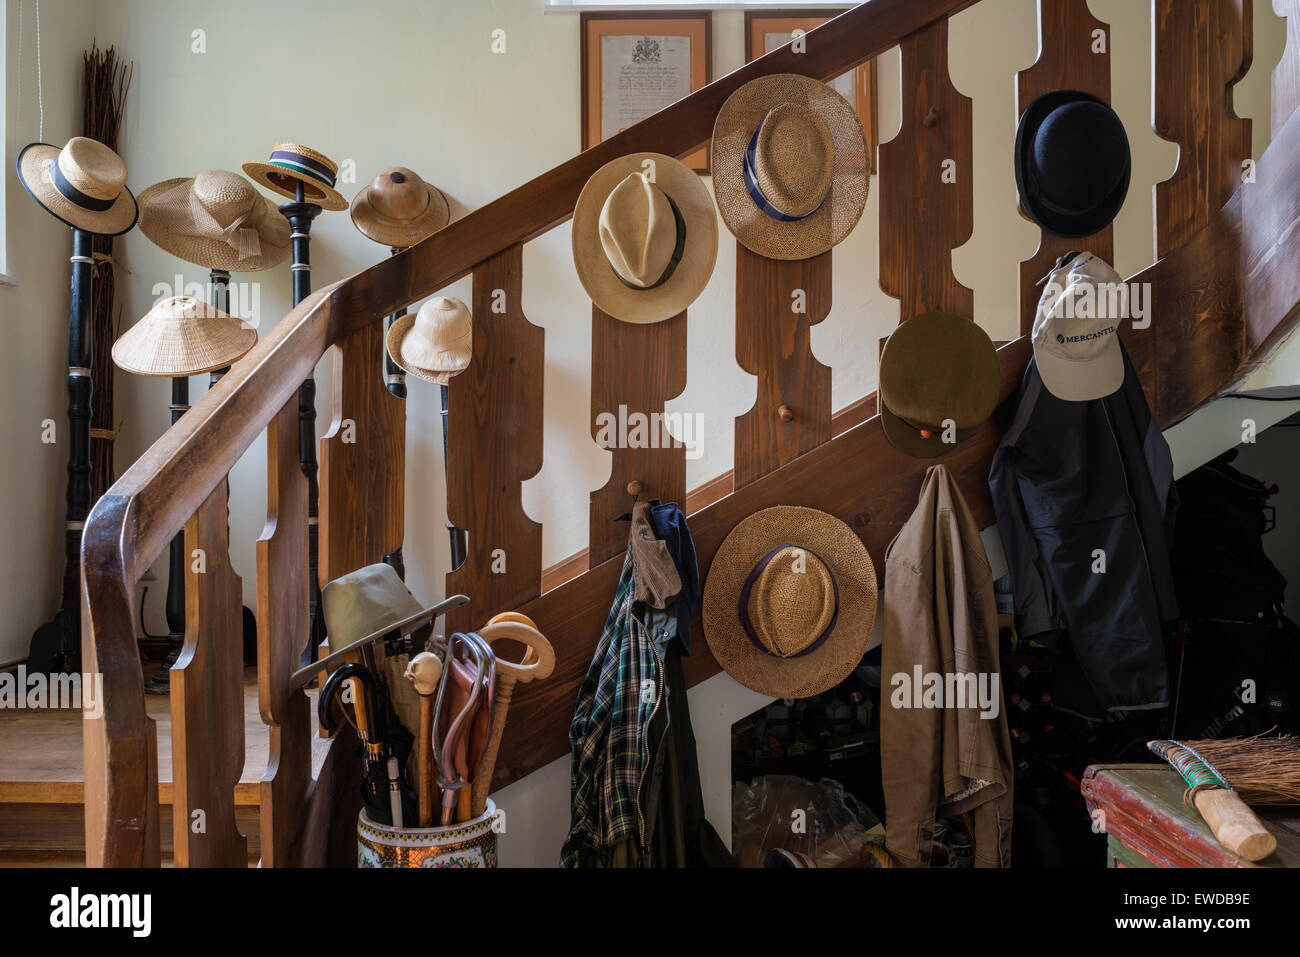 Collection of sun hats on staircase Stock Photo